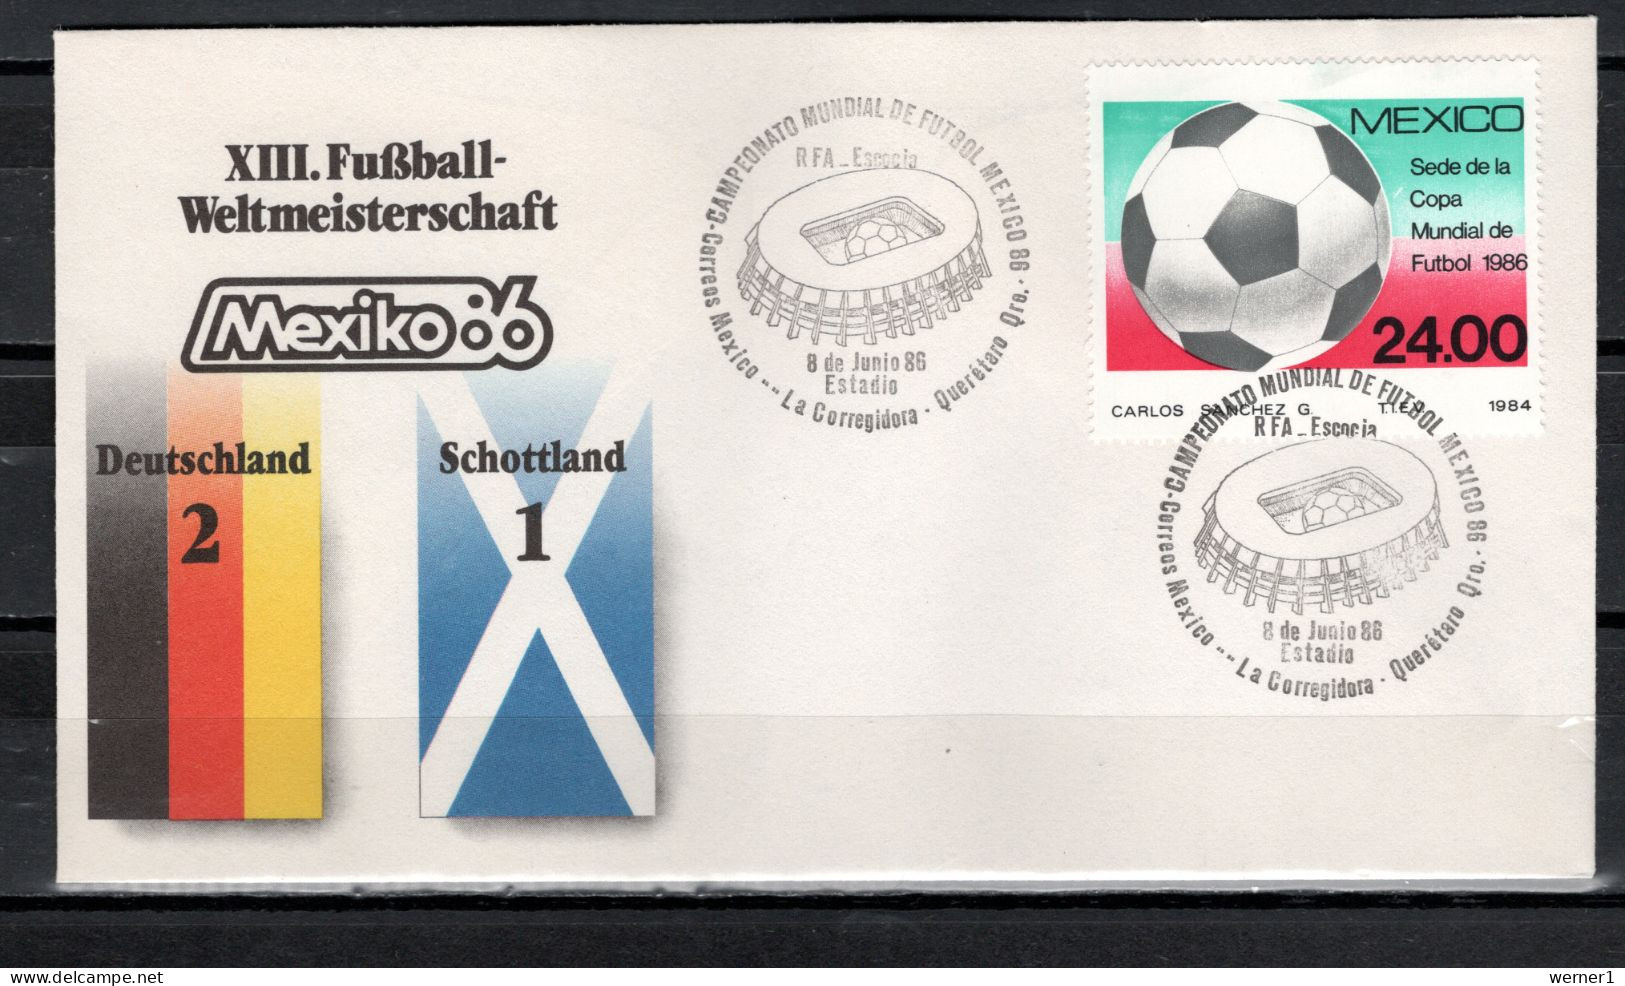 Mexico 1986 Football Soccer World Cup Commemorative Cover Match Germany - Scotland 2 : 1 - 1986 – Mexico